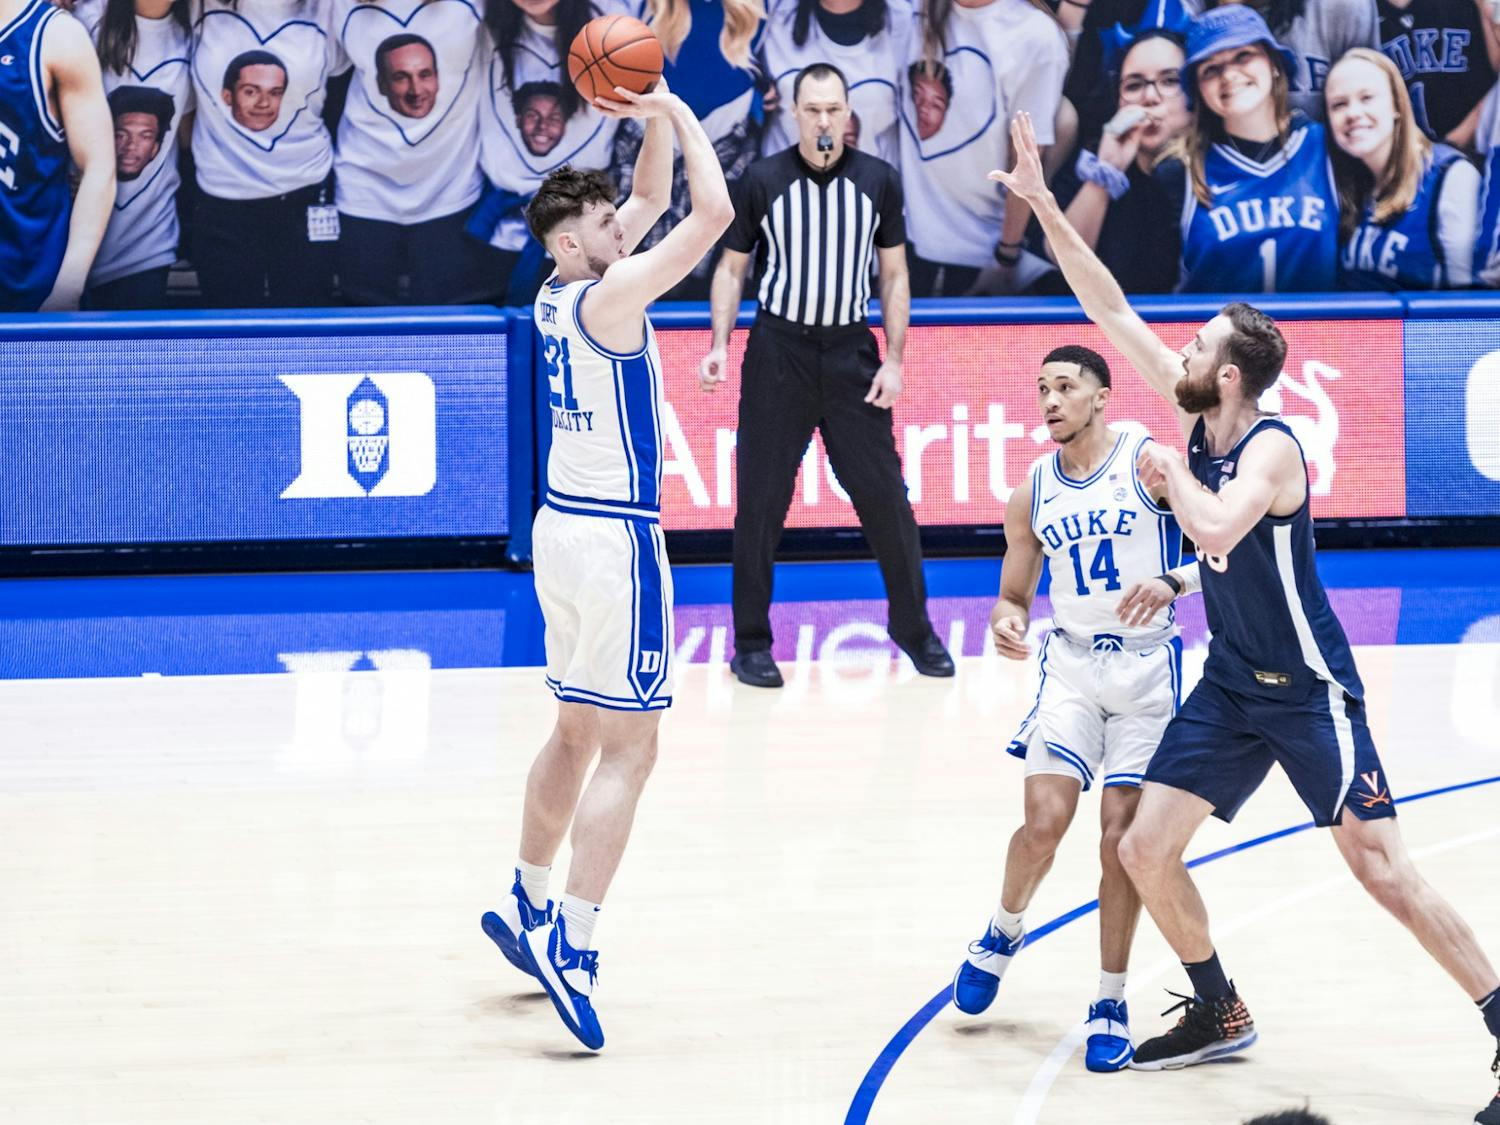 Matthew Hurt has been on fire for the Blue Devils beyond the arc.